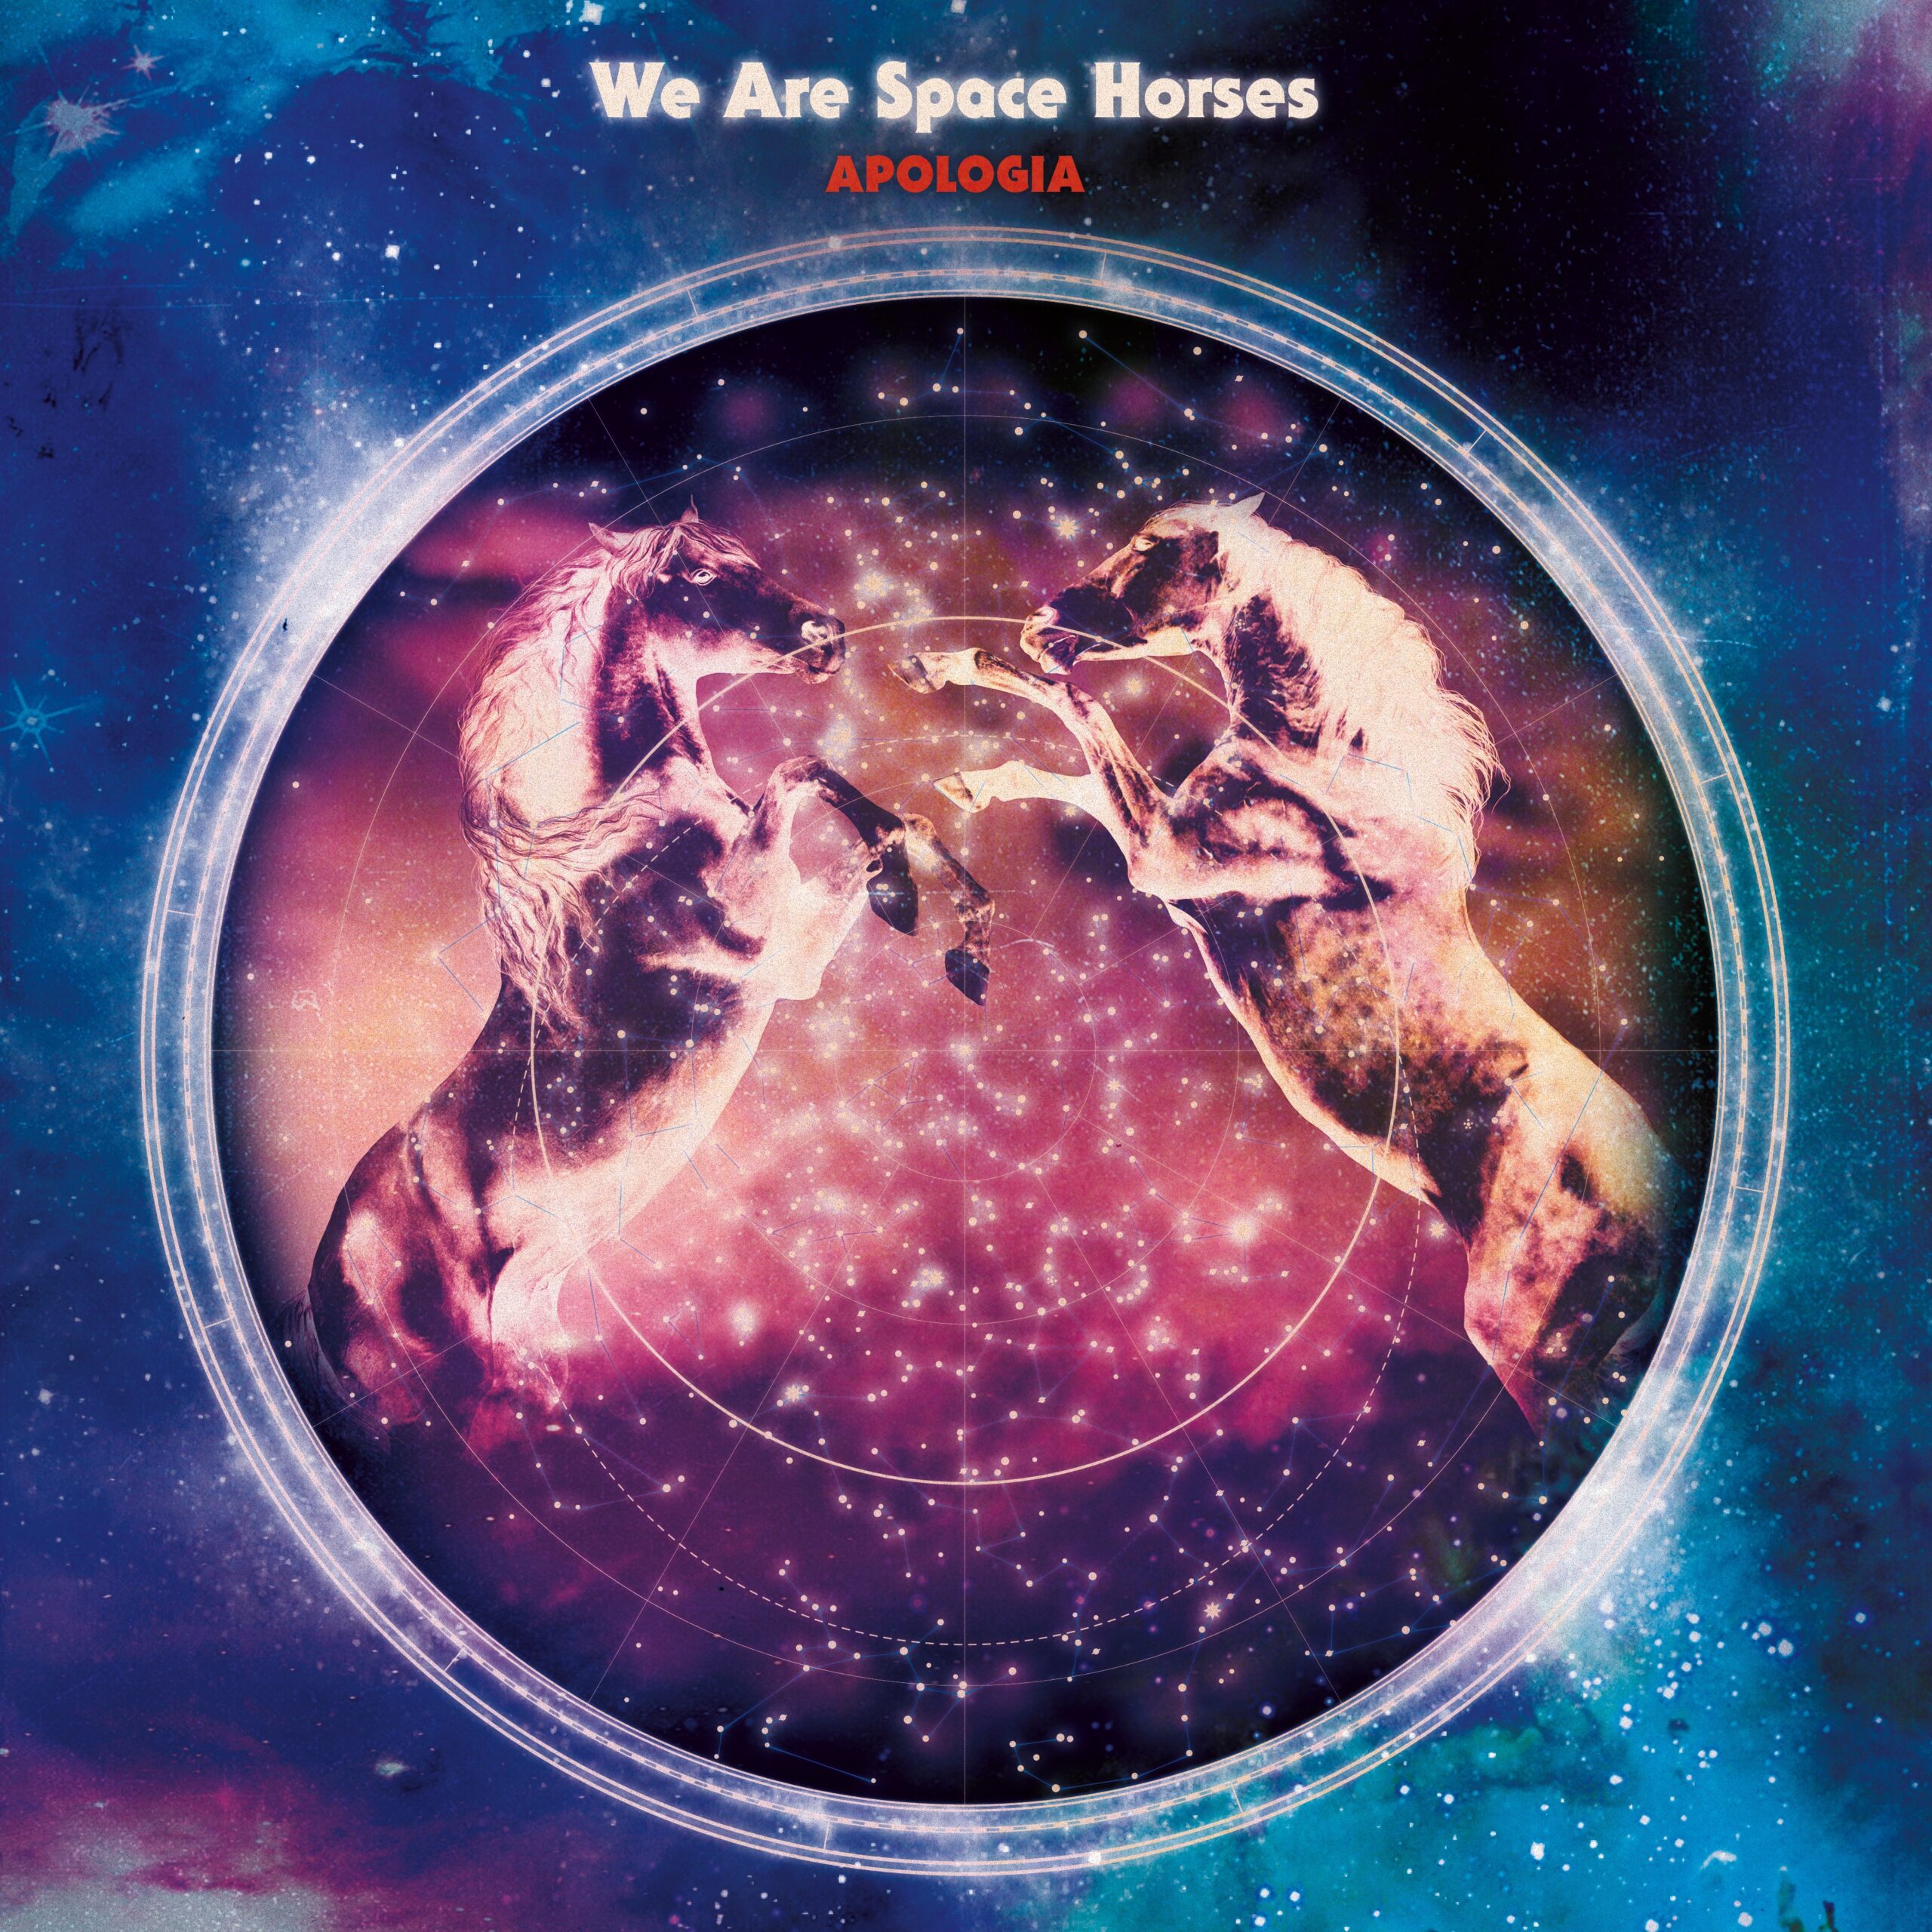 Apologia Unveiled: We Are Space Horses Crafts a Journey of Retro Rock Reflections”